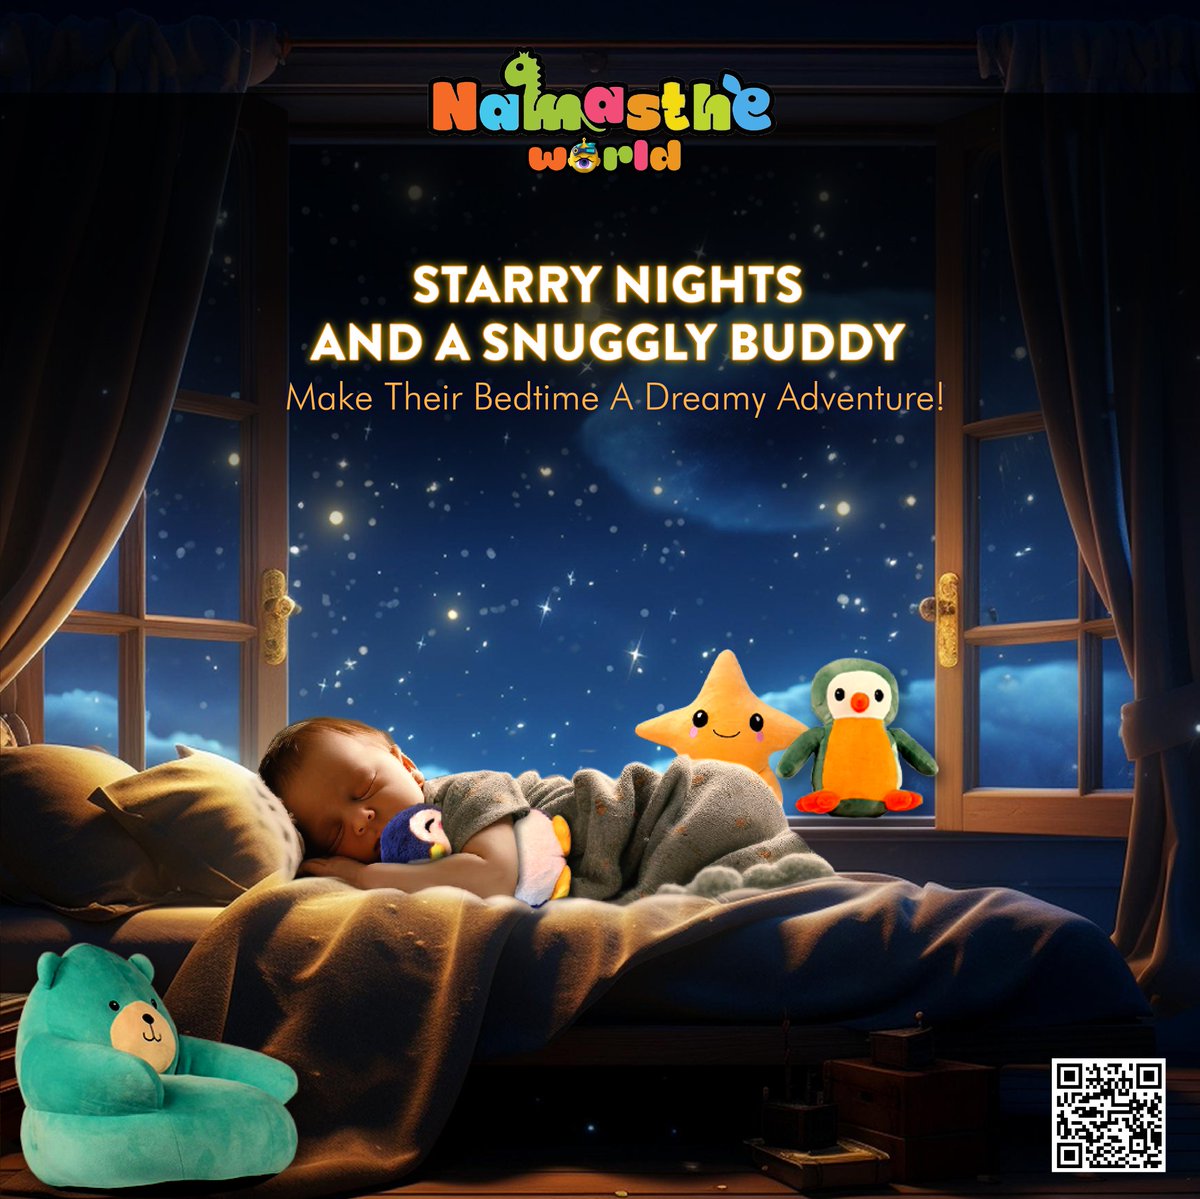 Soft blankets and a plush friend – the perfect recipe for a cozy night's sleep! With a bedtime story and a trusty stuffed companion, goodnight becomes a great night! Gift a cuddle buddy to your little one and make their bedtime an epic adventure! DM us to know more! #Plushies